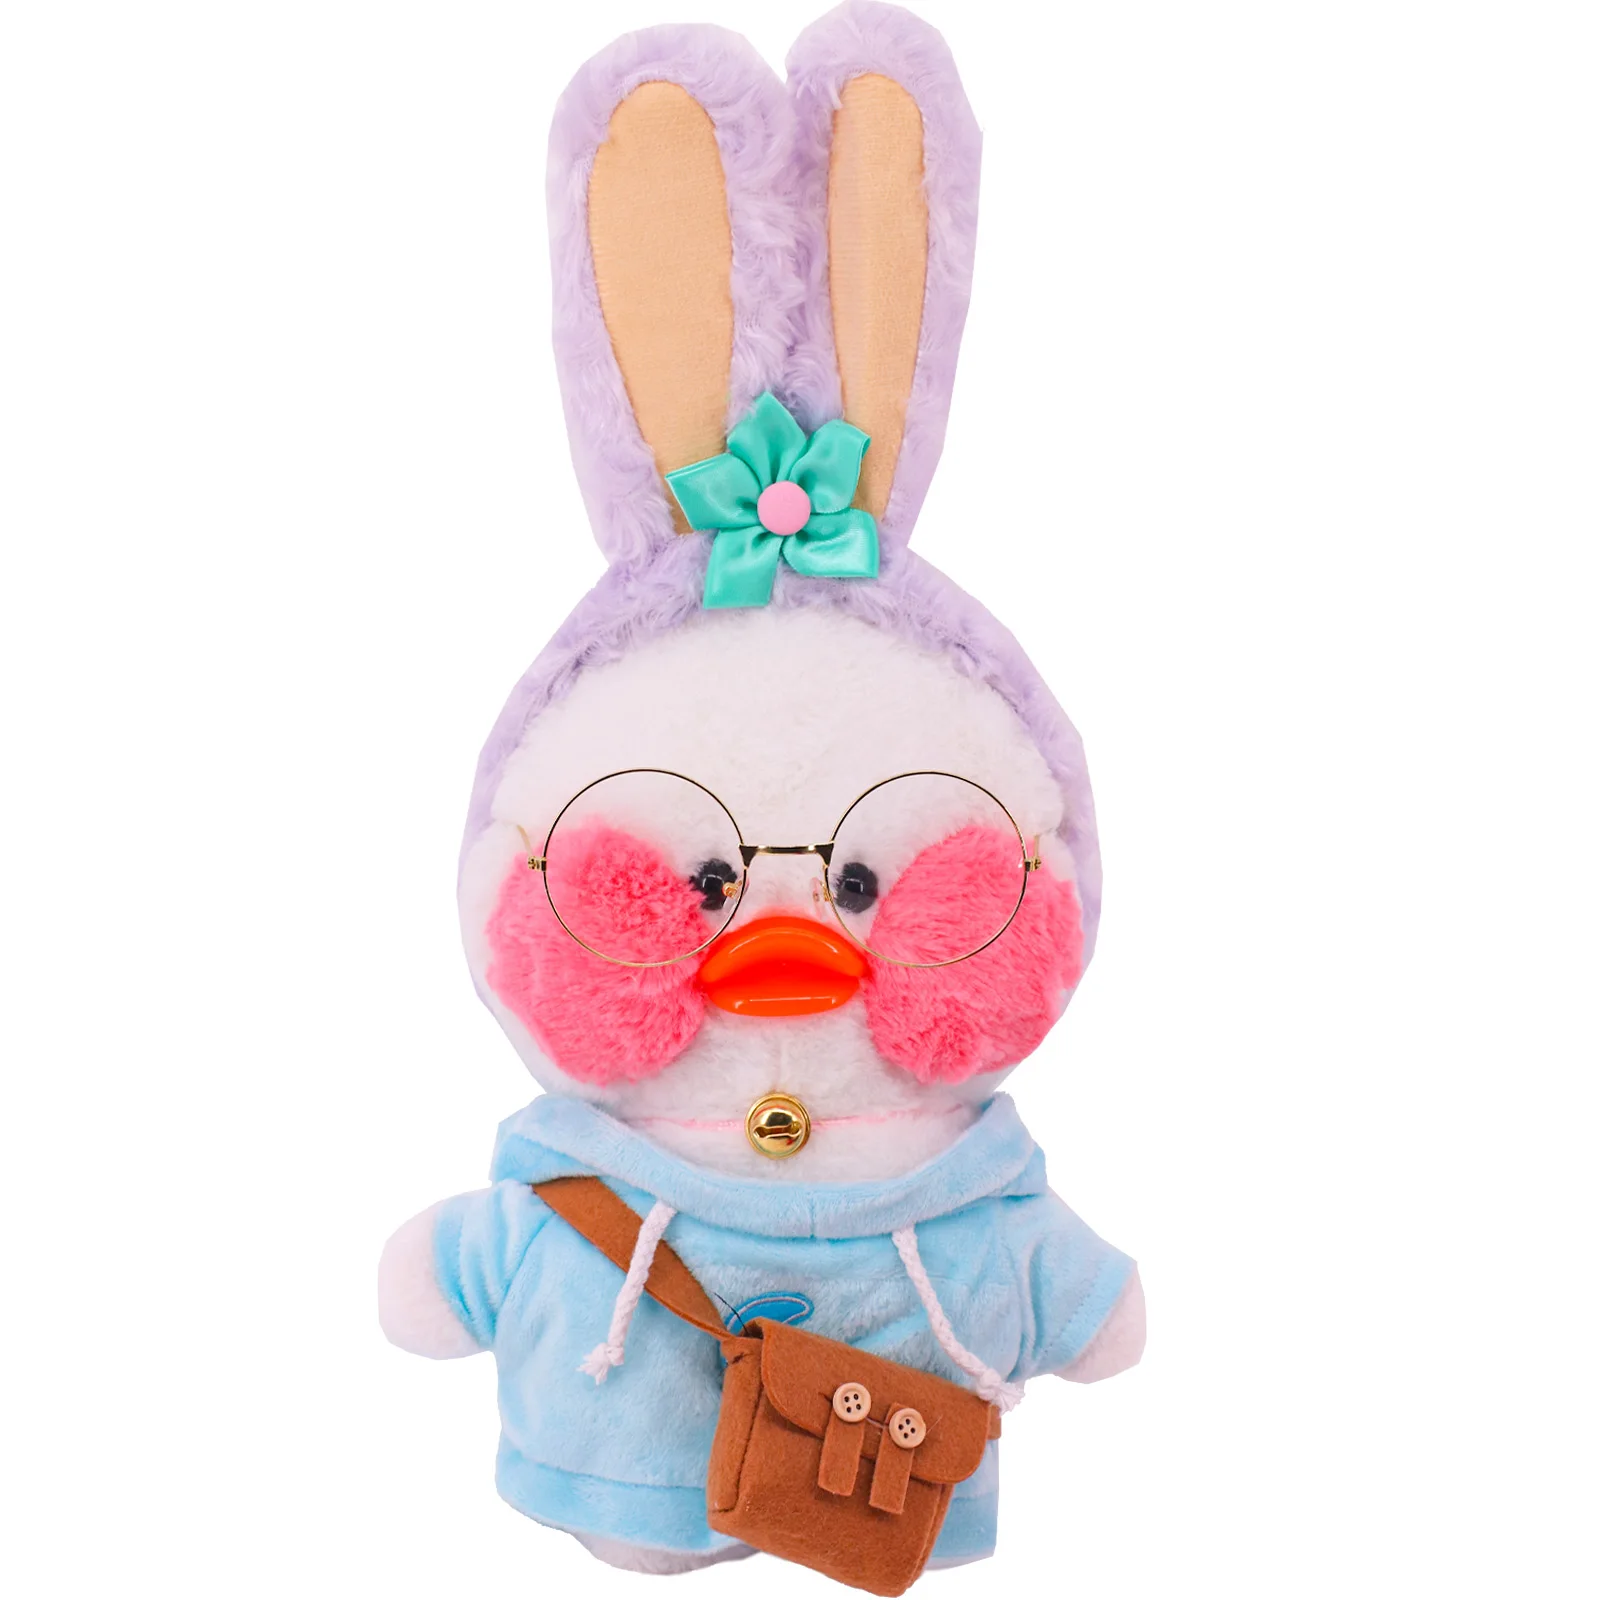 1PC Doll Clothes Bag Hair Band Accessories for 30cm LaLafanfan Duck Plush Dolls Outfit Sweater Strap Pants for 20-30cm Plush Toy